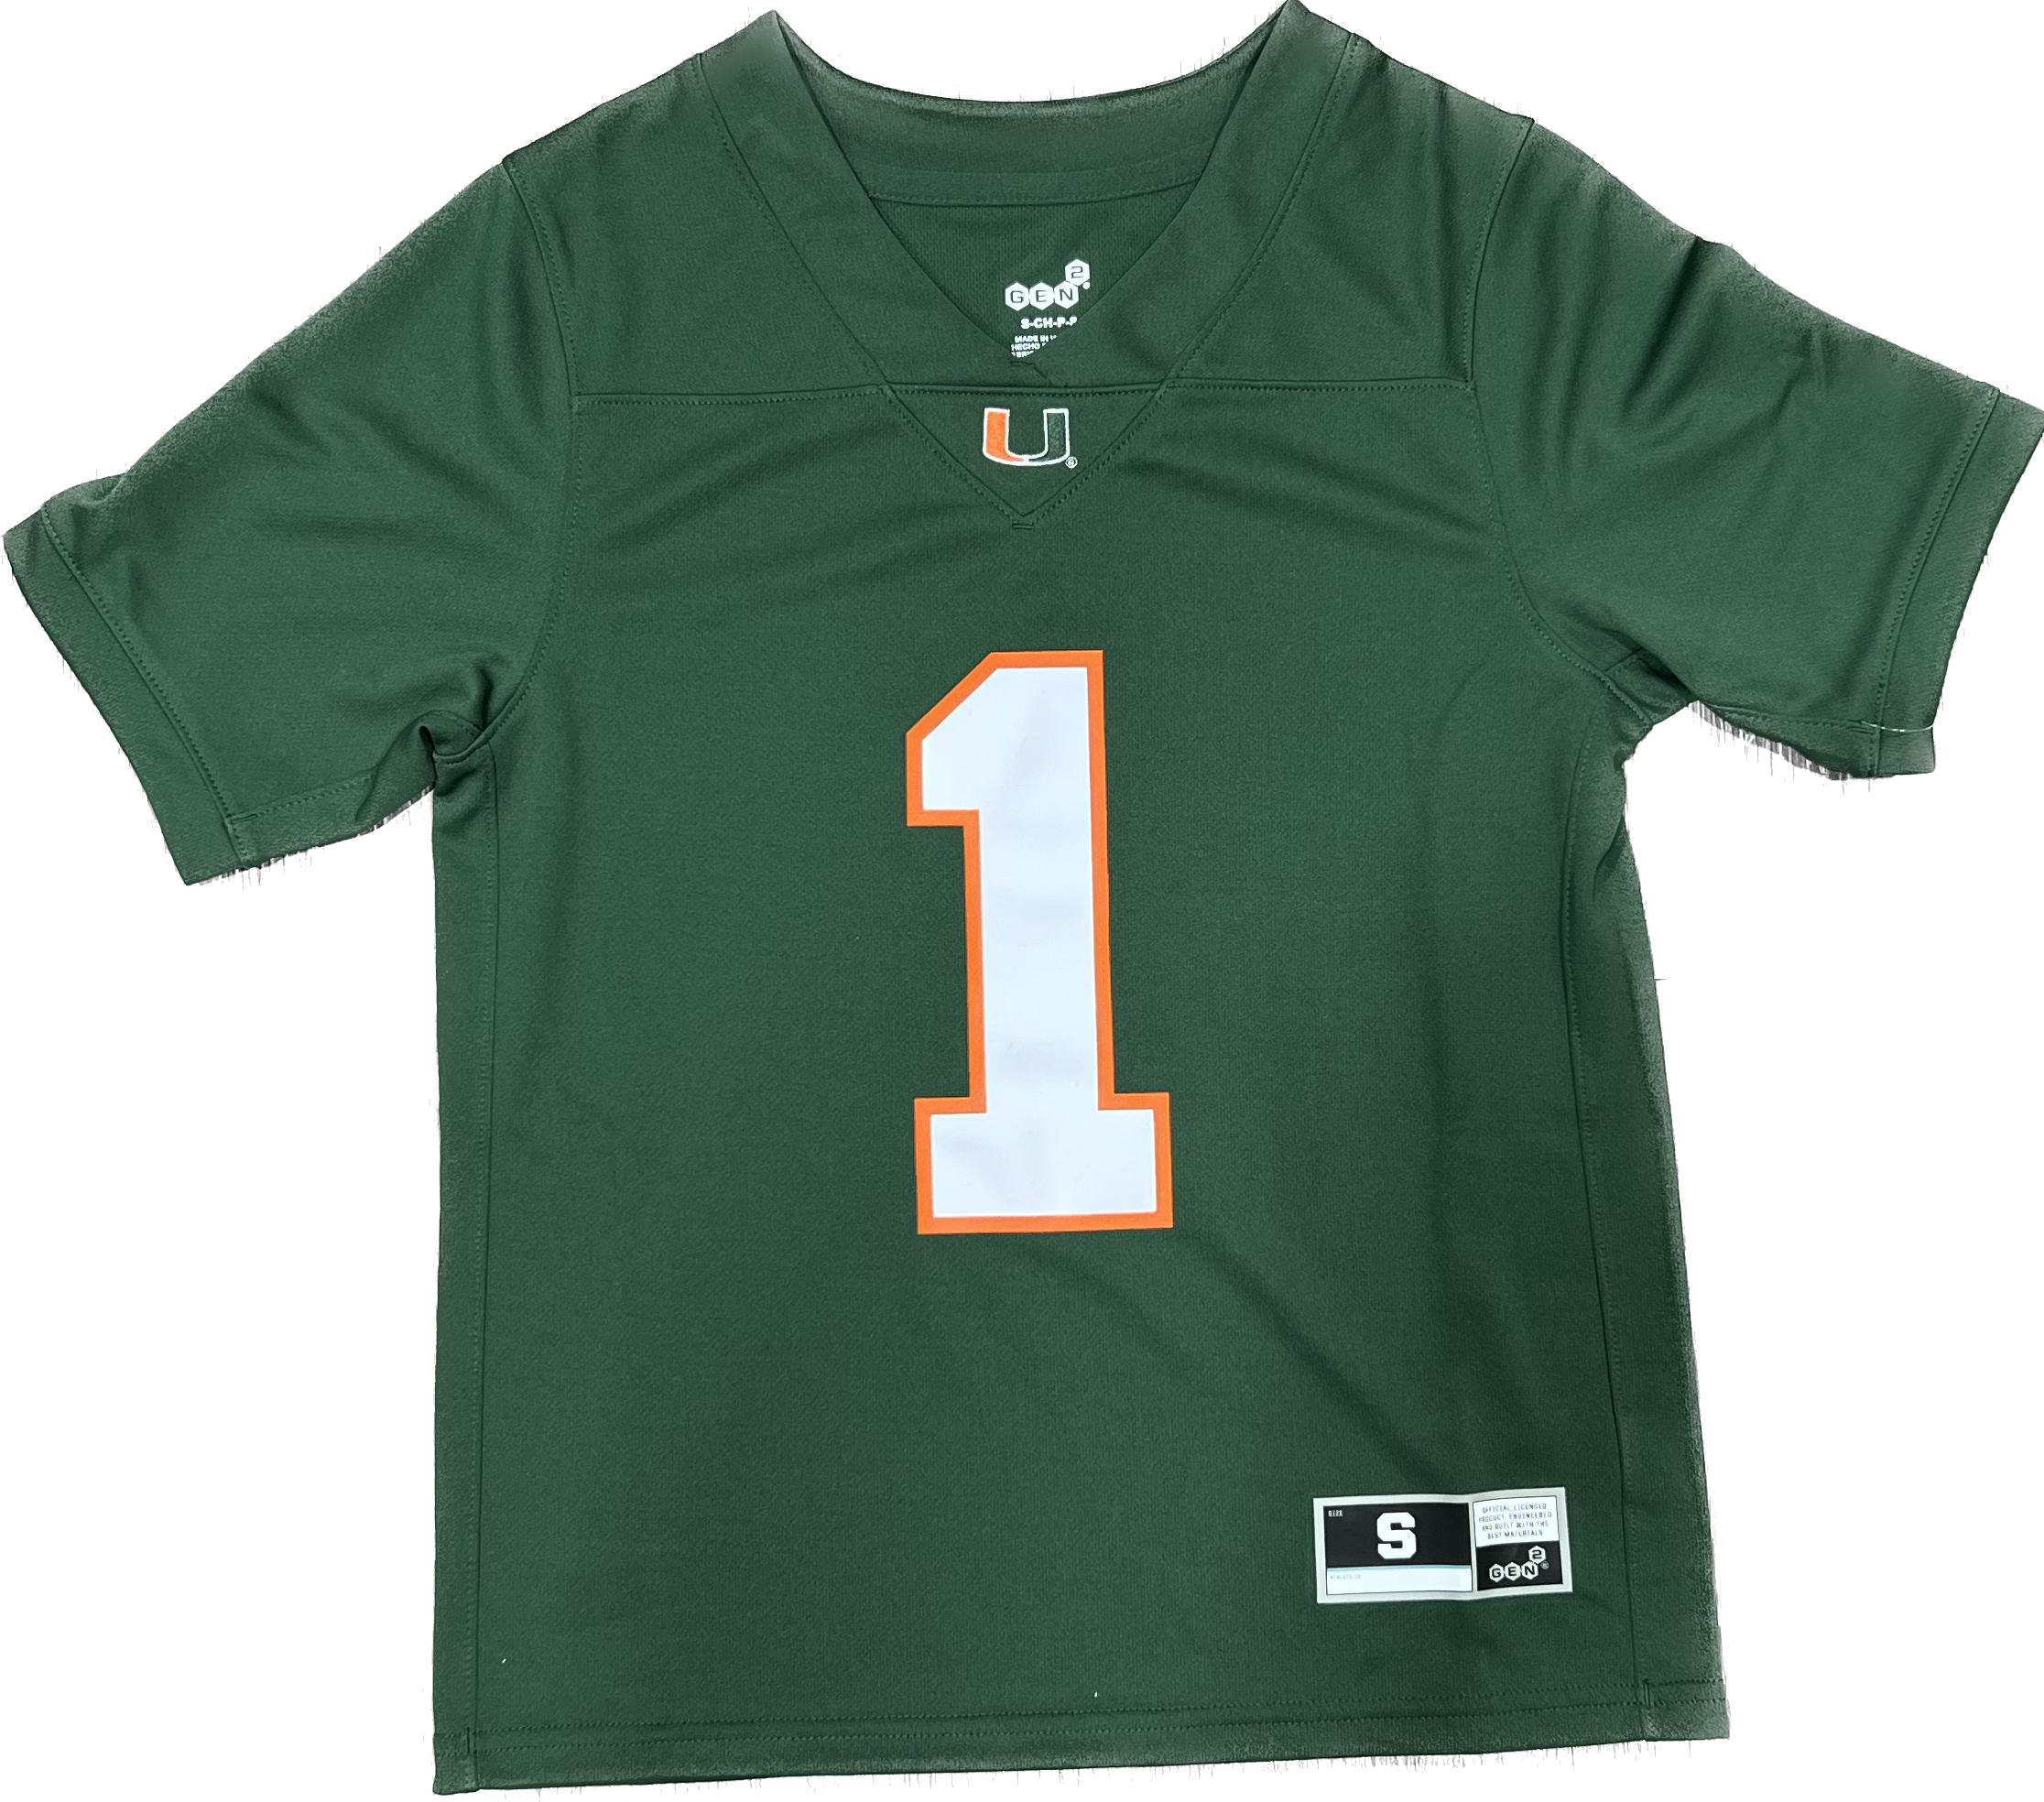 Hurricanes youth jersey